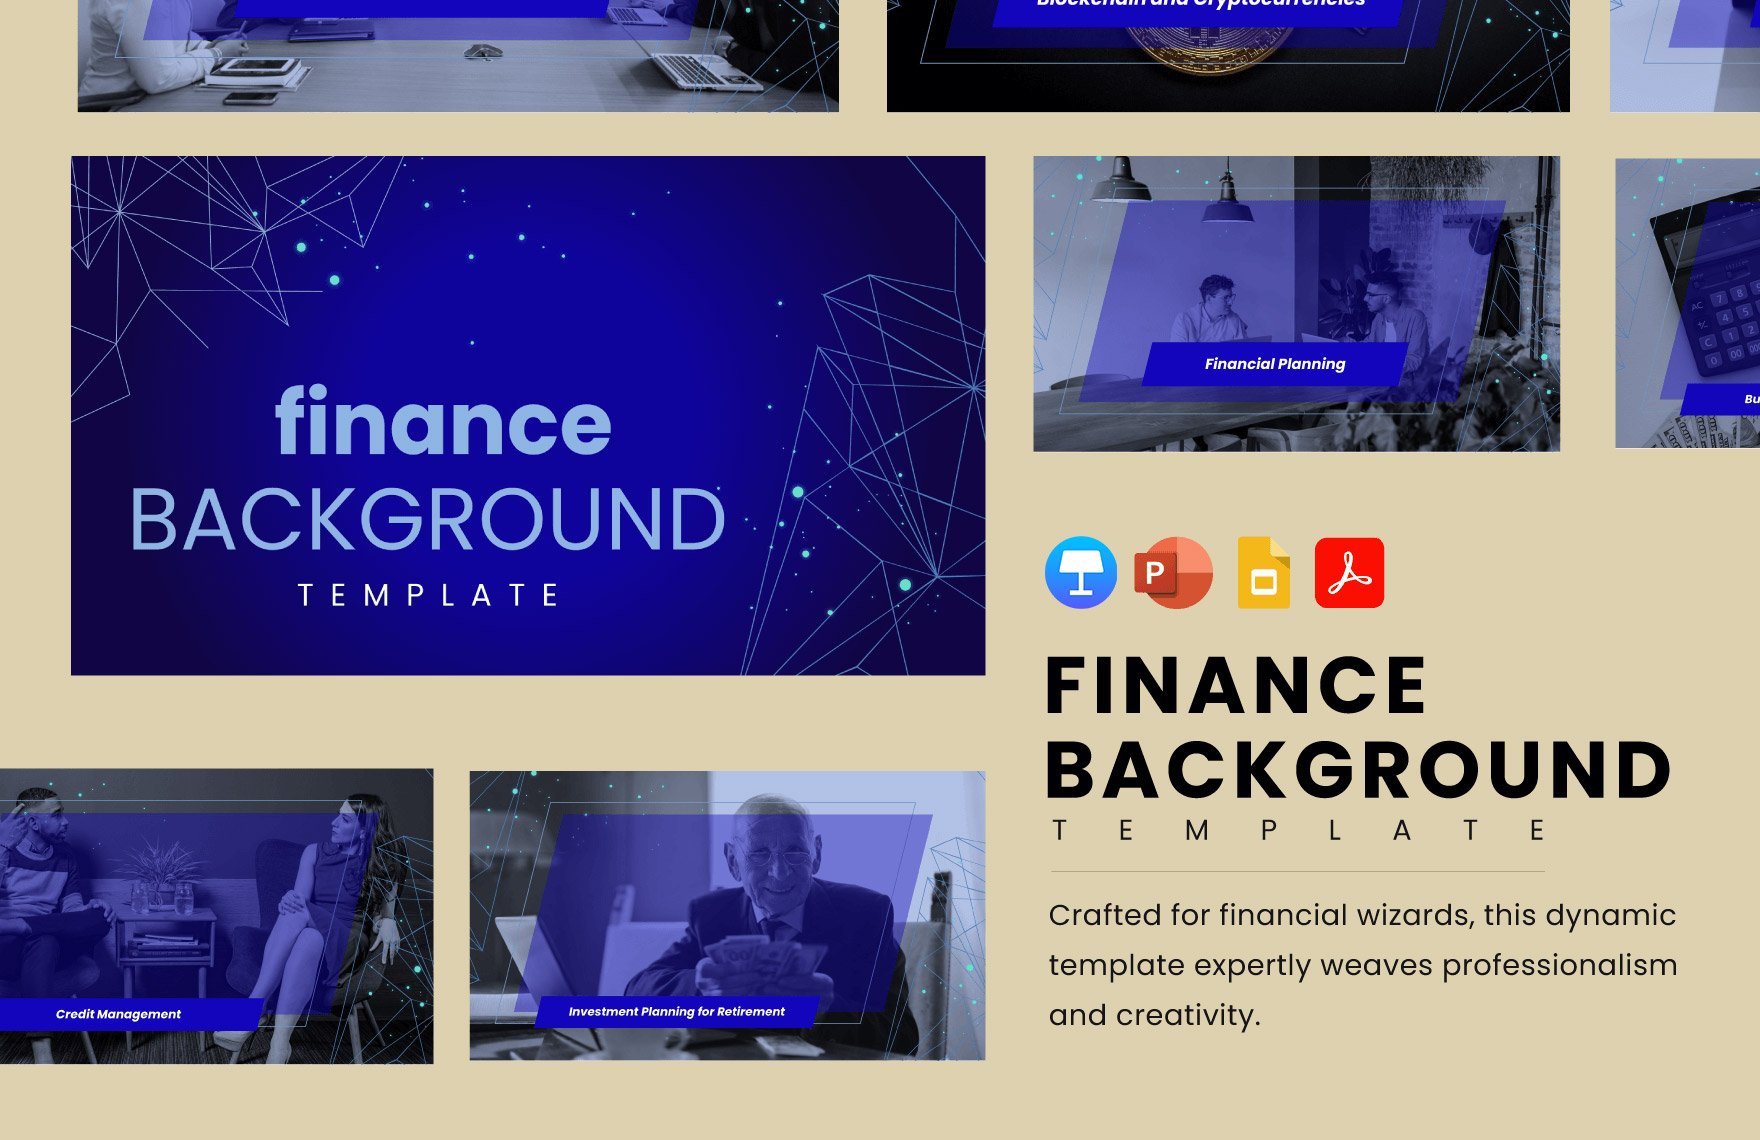 Finance Background Template